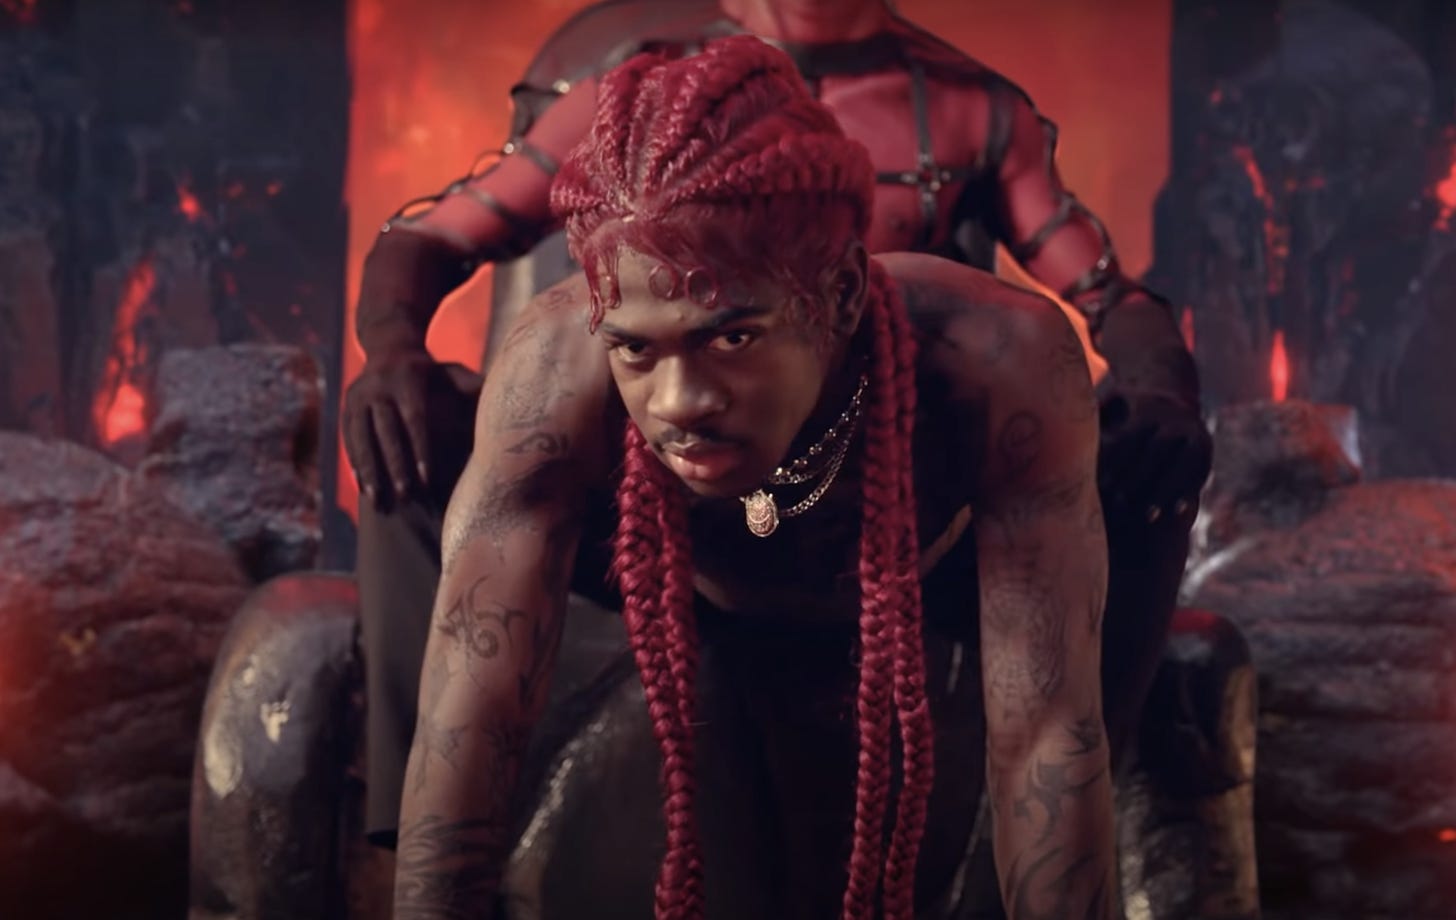 Lil Nas X Gives Satan a Lap Dance in a Fiery, Very Queer New Video | them.